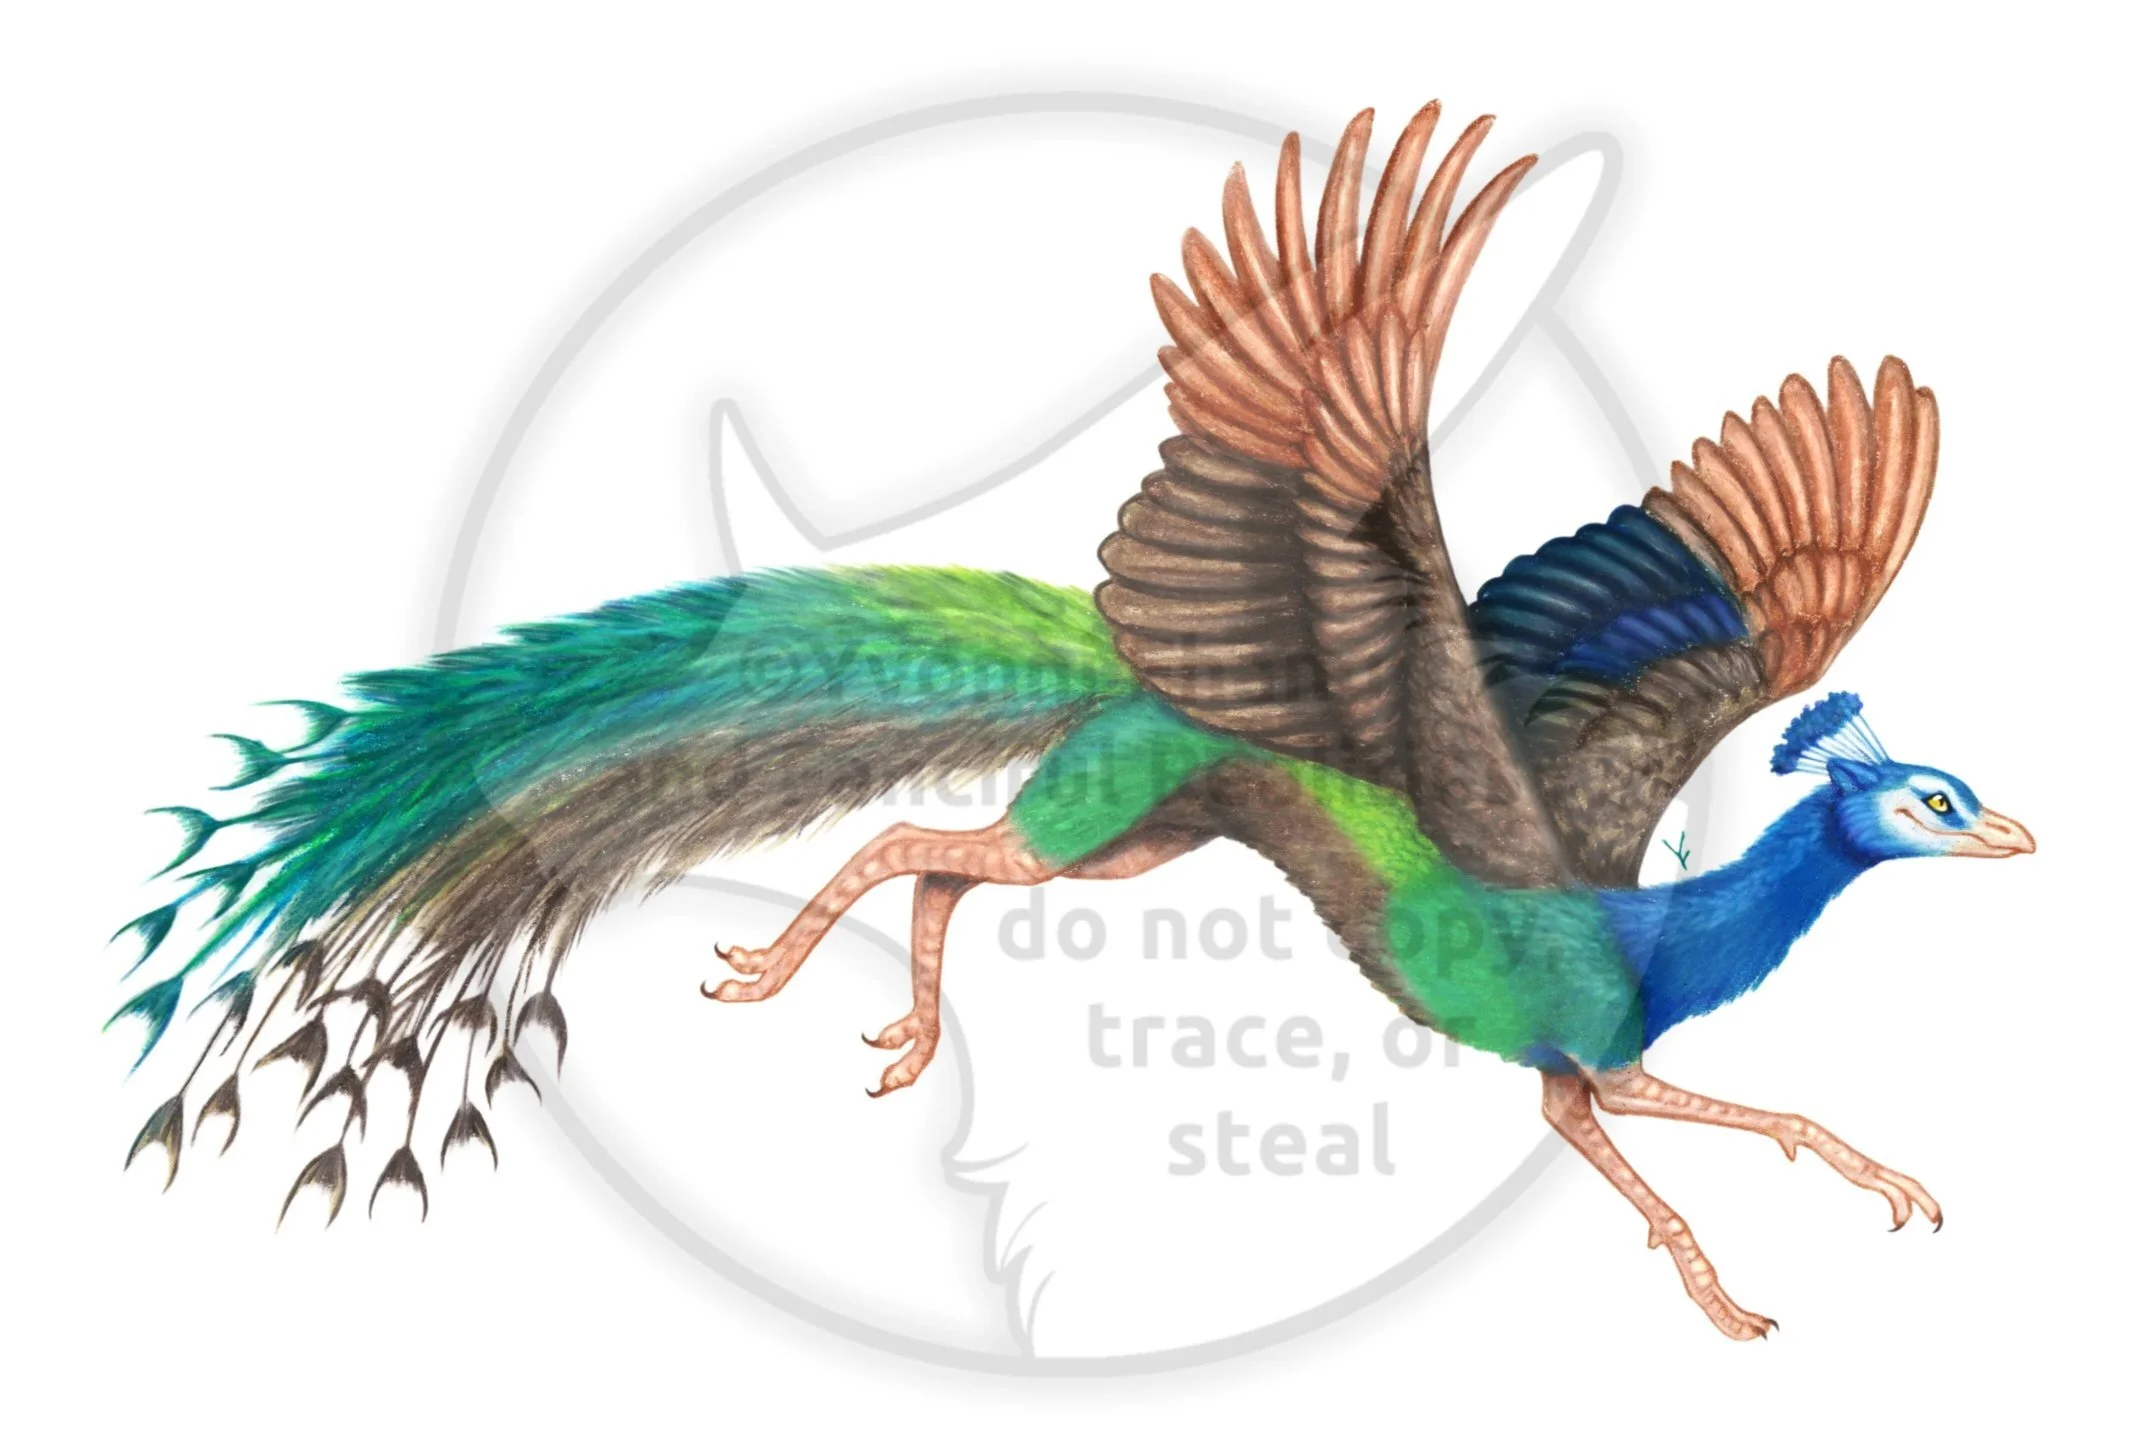 A pretty dragon creature based on a colorful peacock bird.